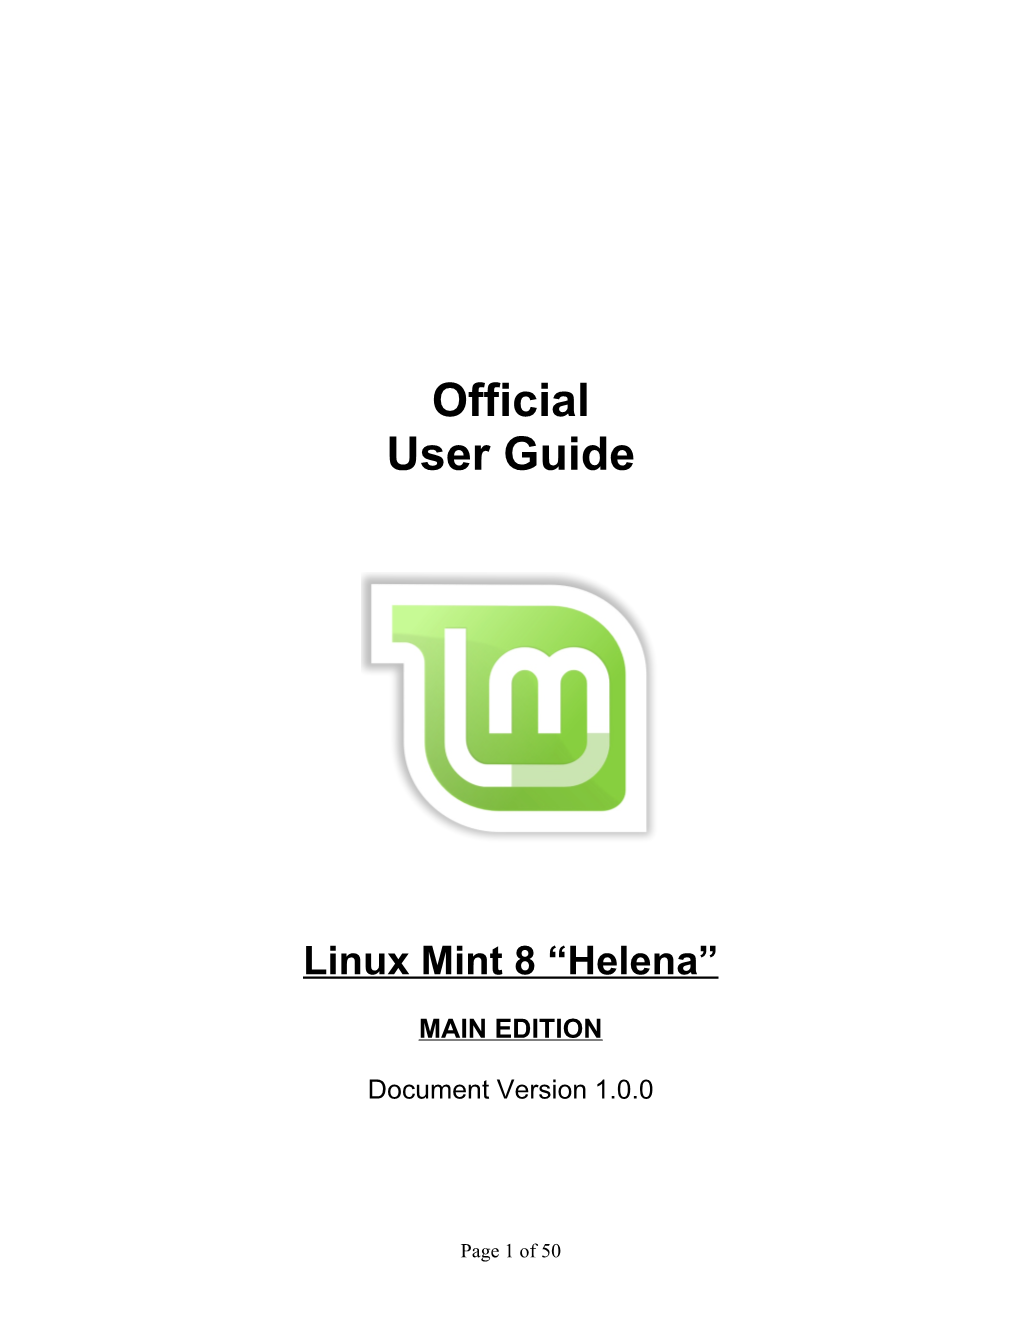 Introduction to Linux Mint